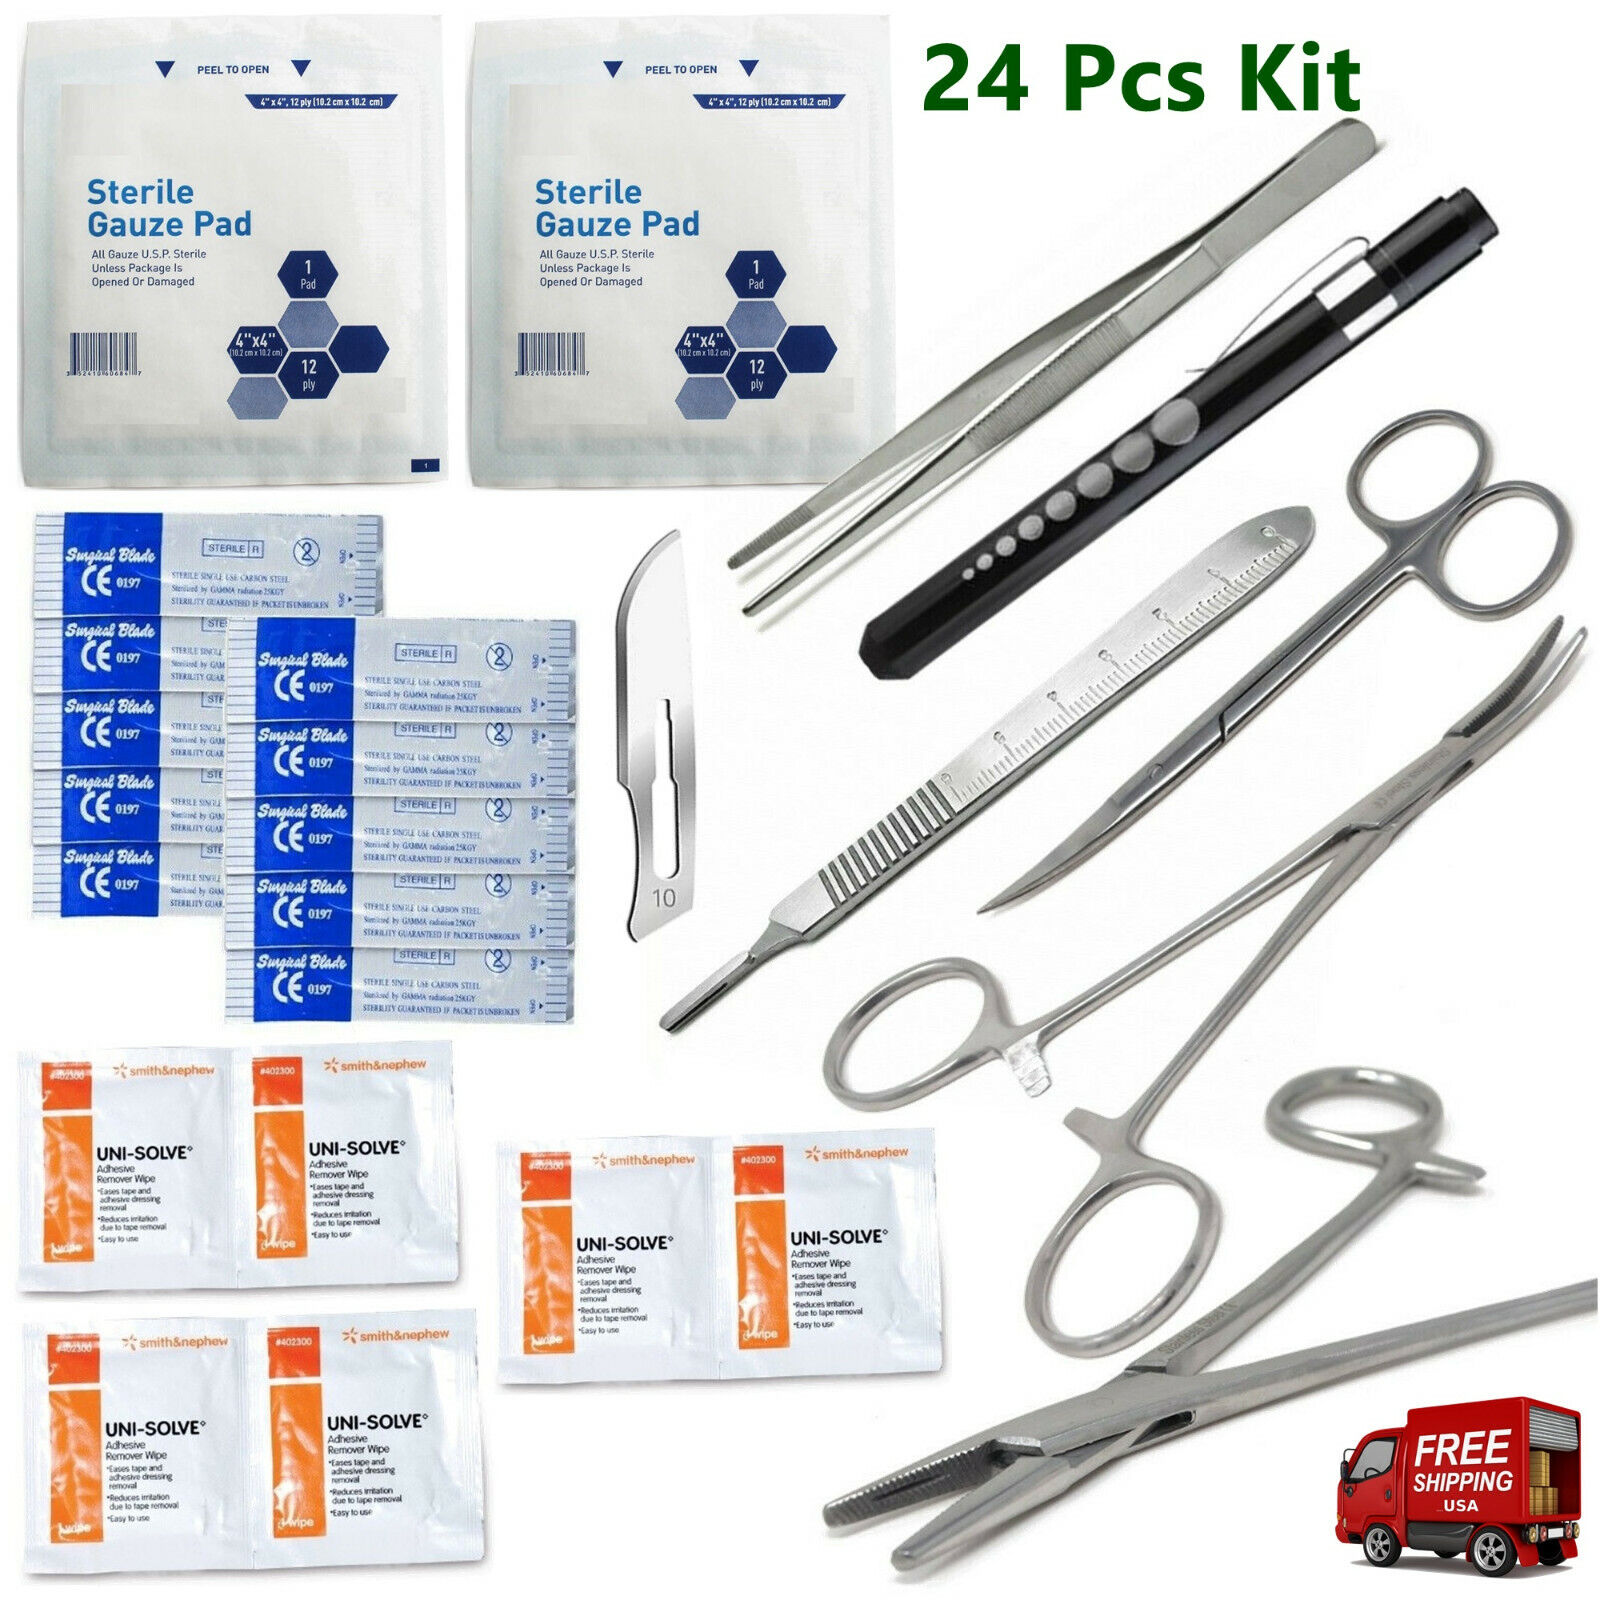 Military Surgical Suture Kit, Suture Set With Scalpel, 24 Piece Kit hti brand Does Not Aaply